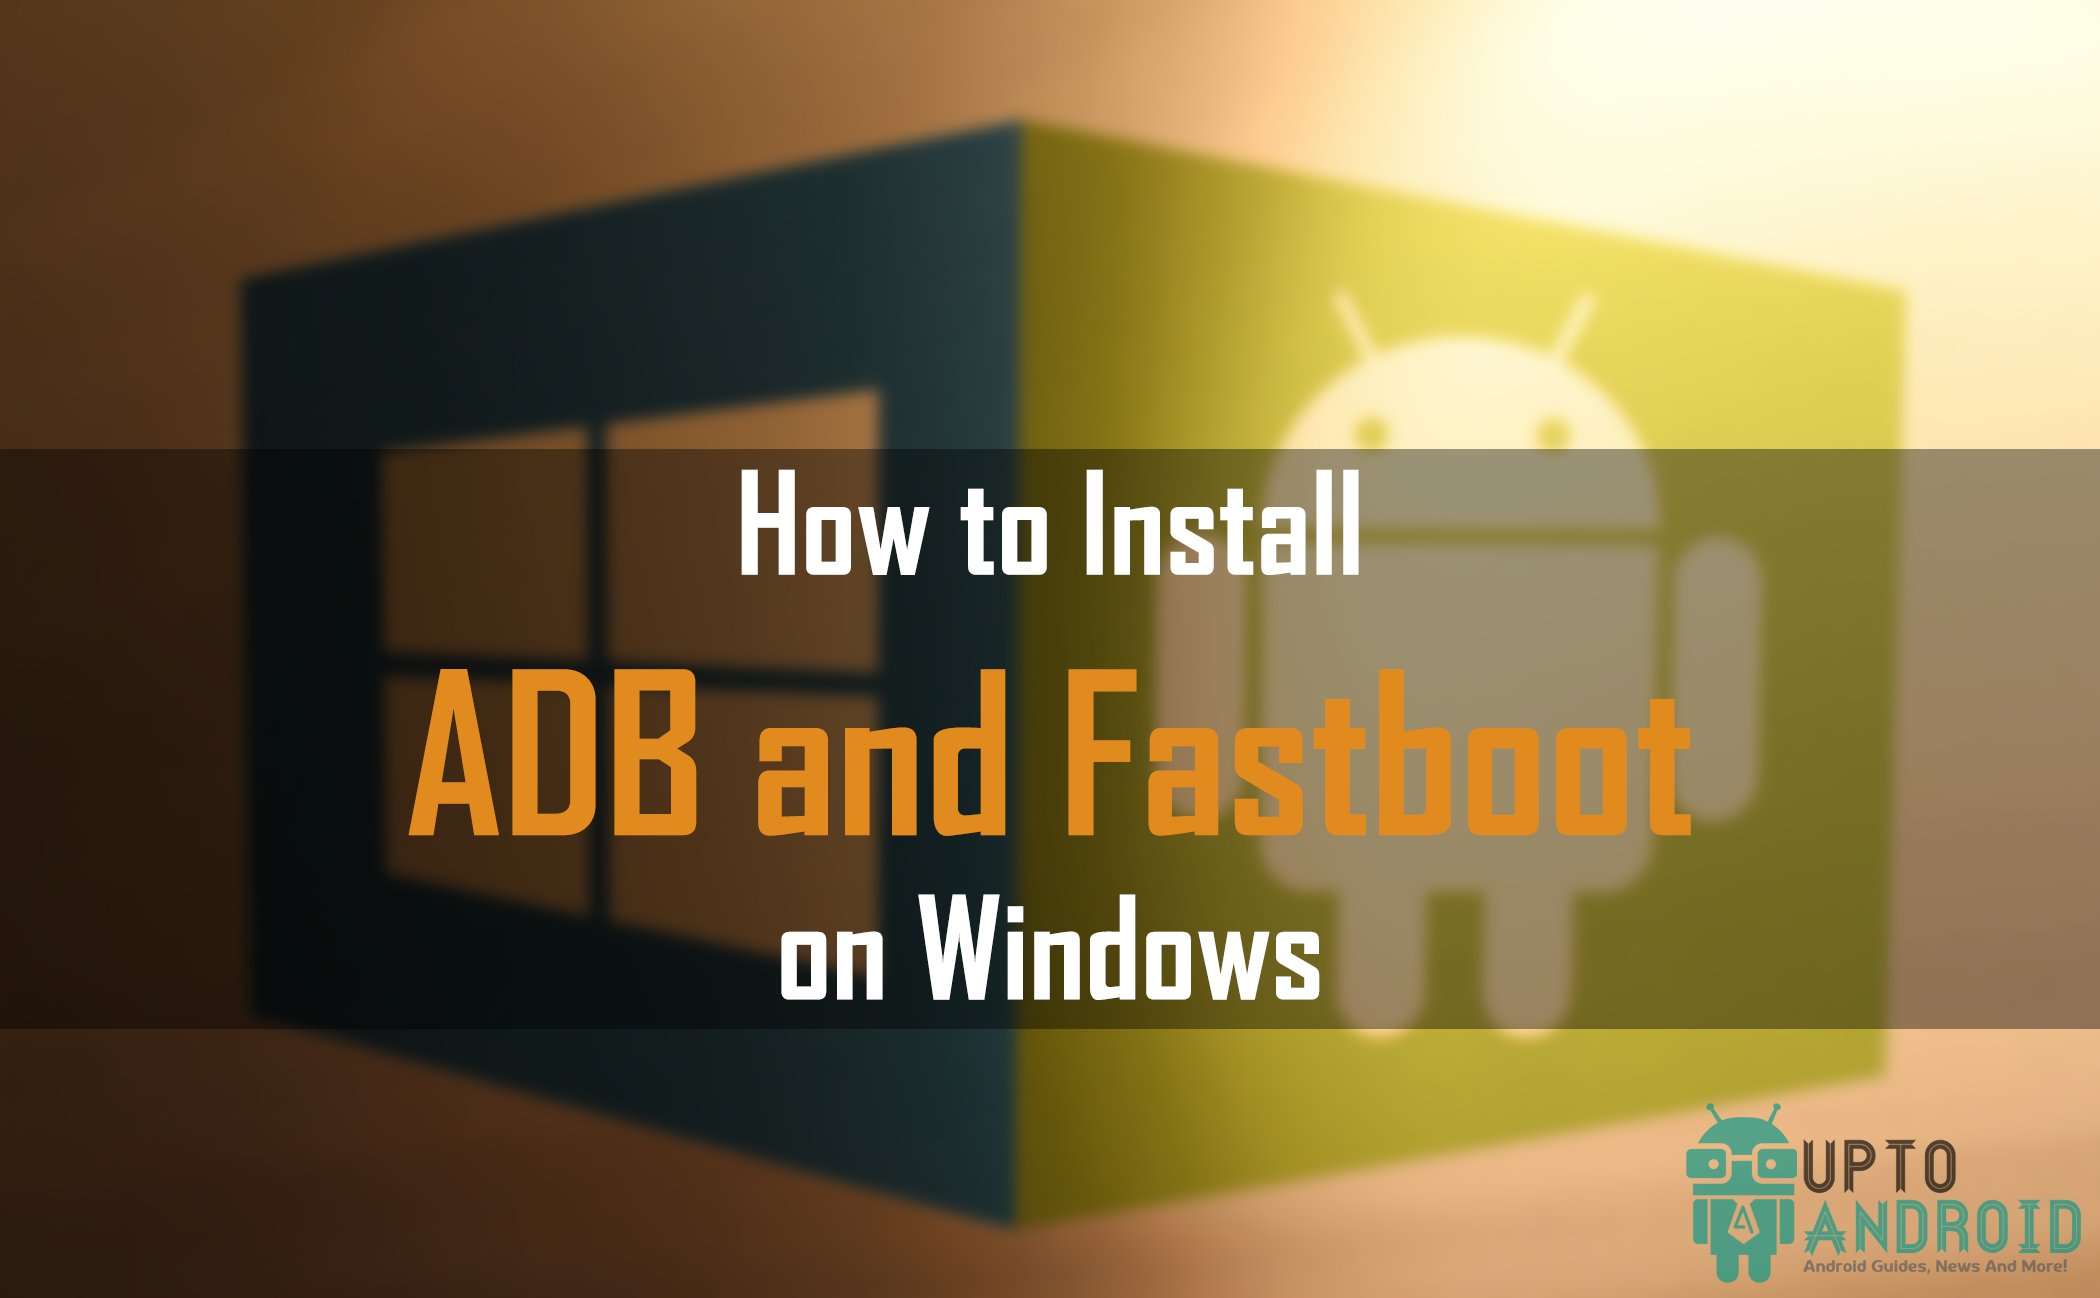 how to install adb fastboot standalone on windows 10